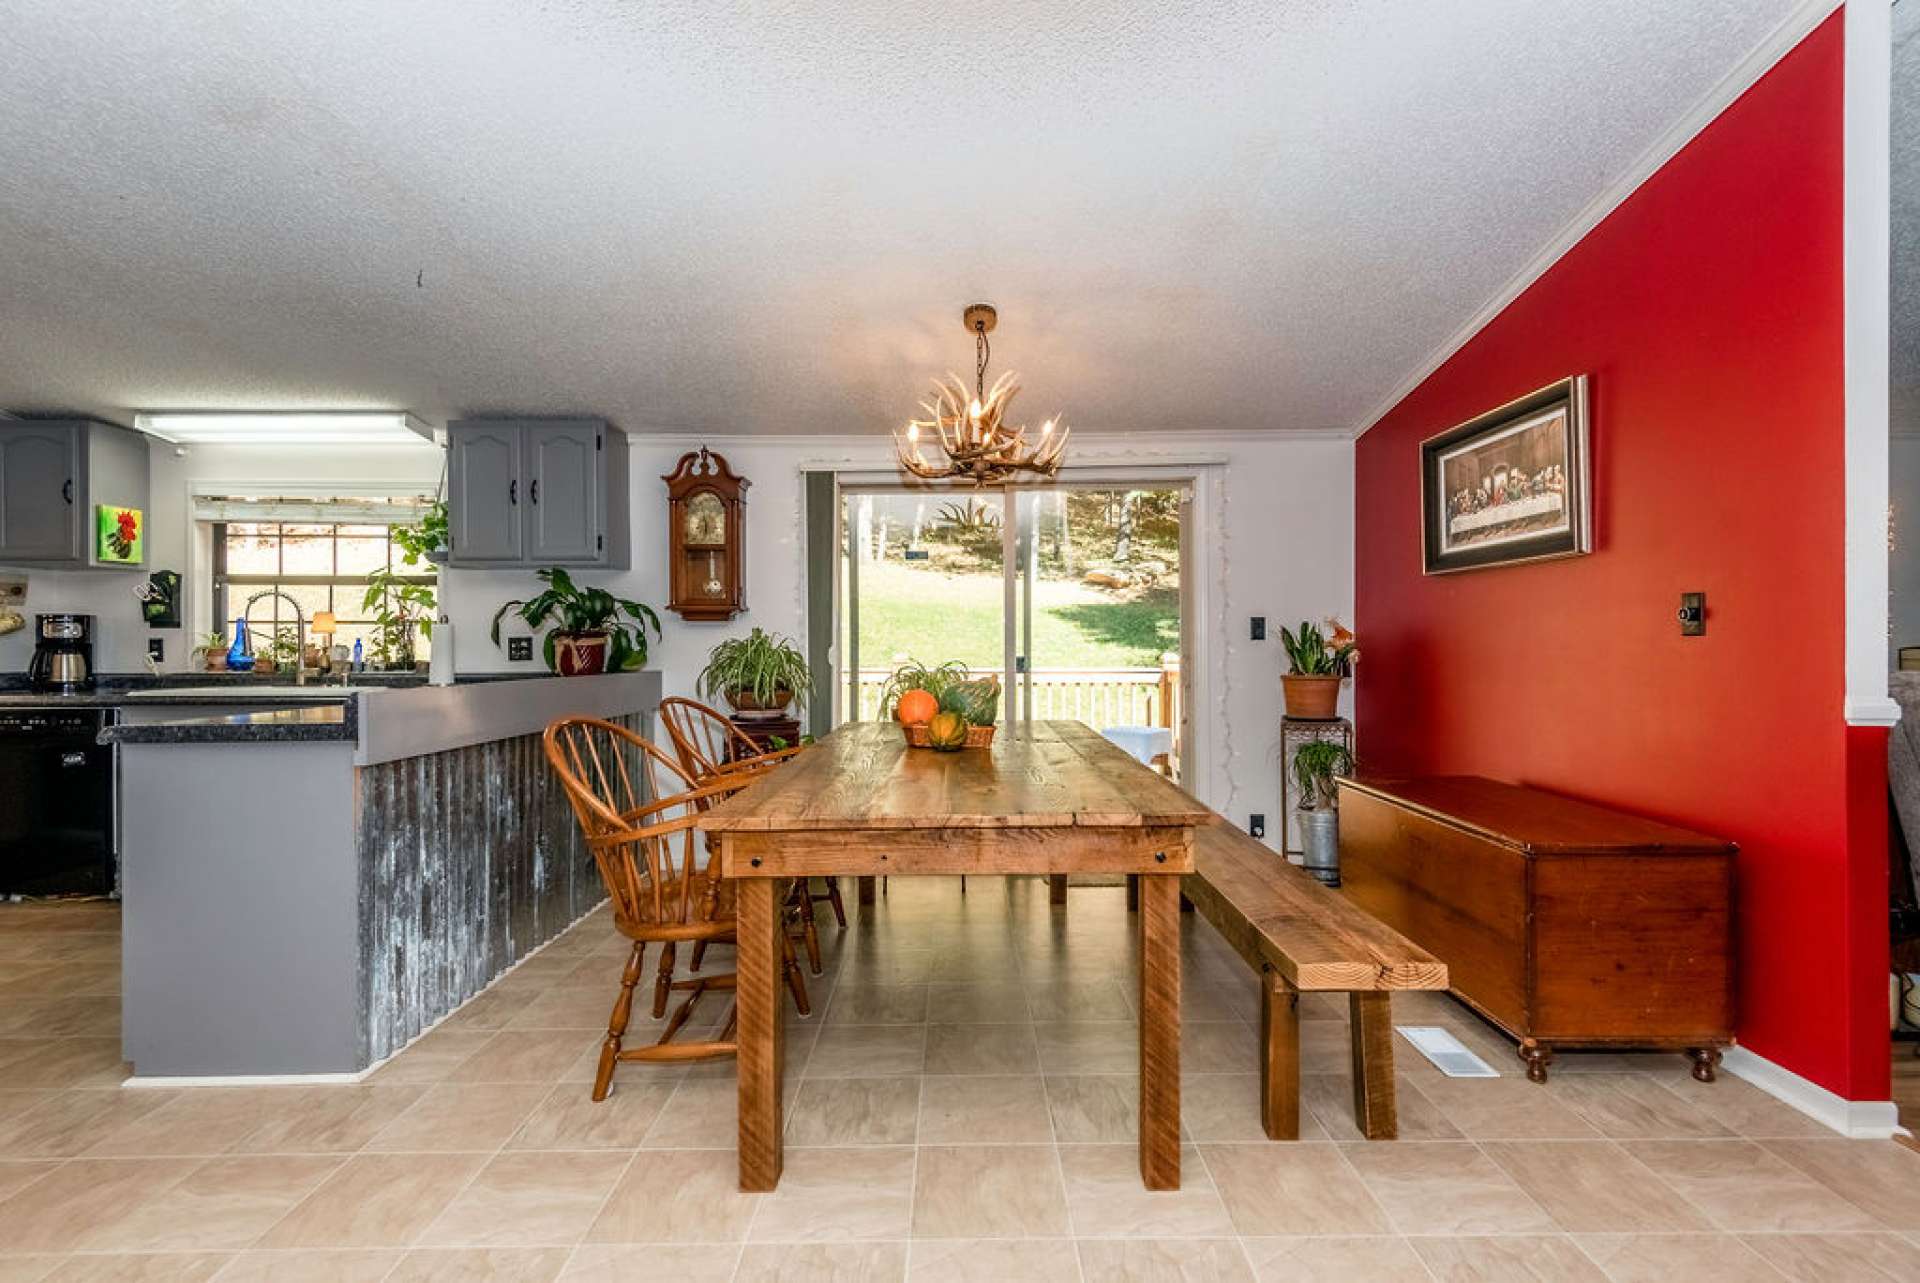 The dining area offers easy access to the back deck for outdoor grilling and dining.